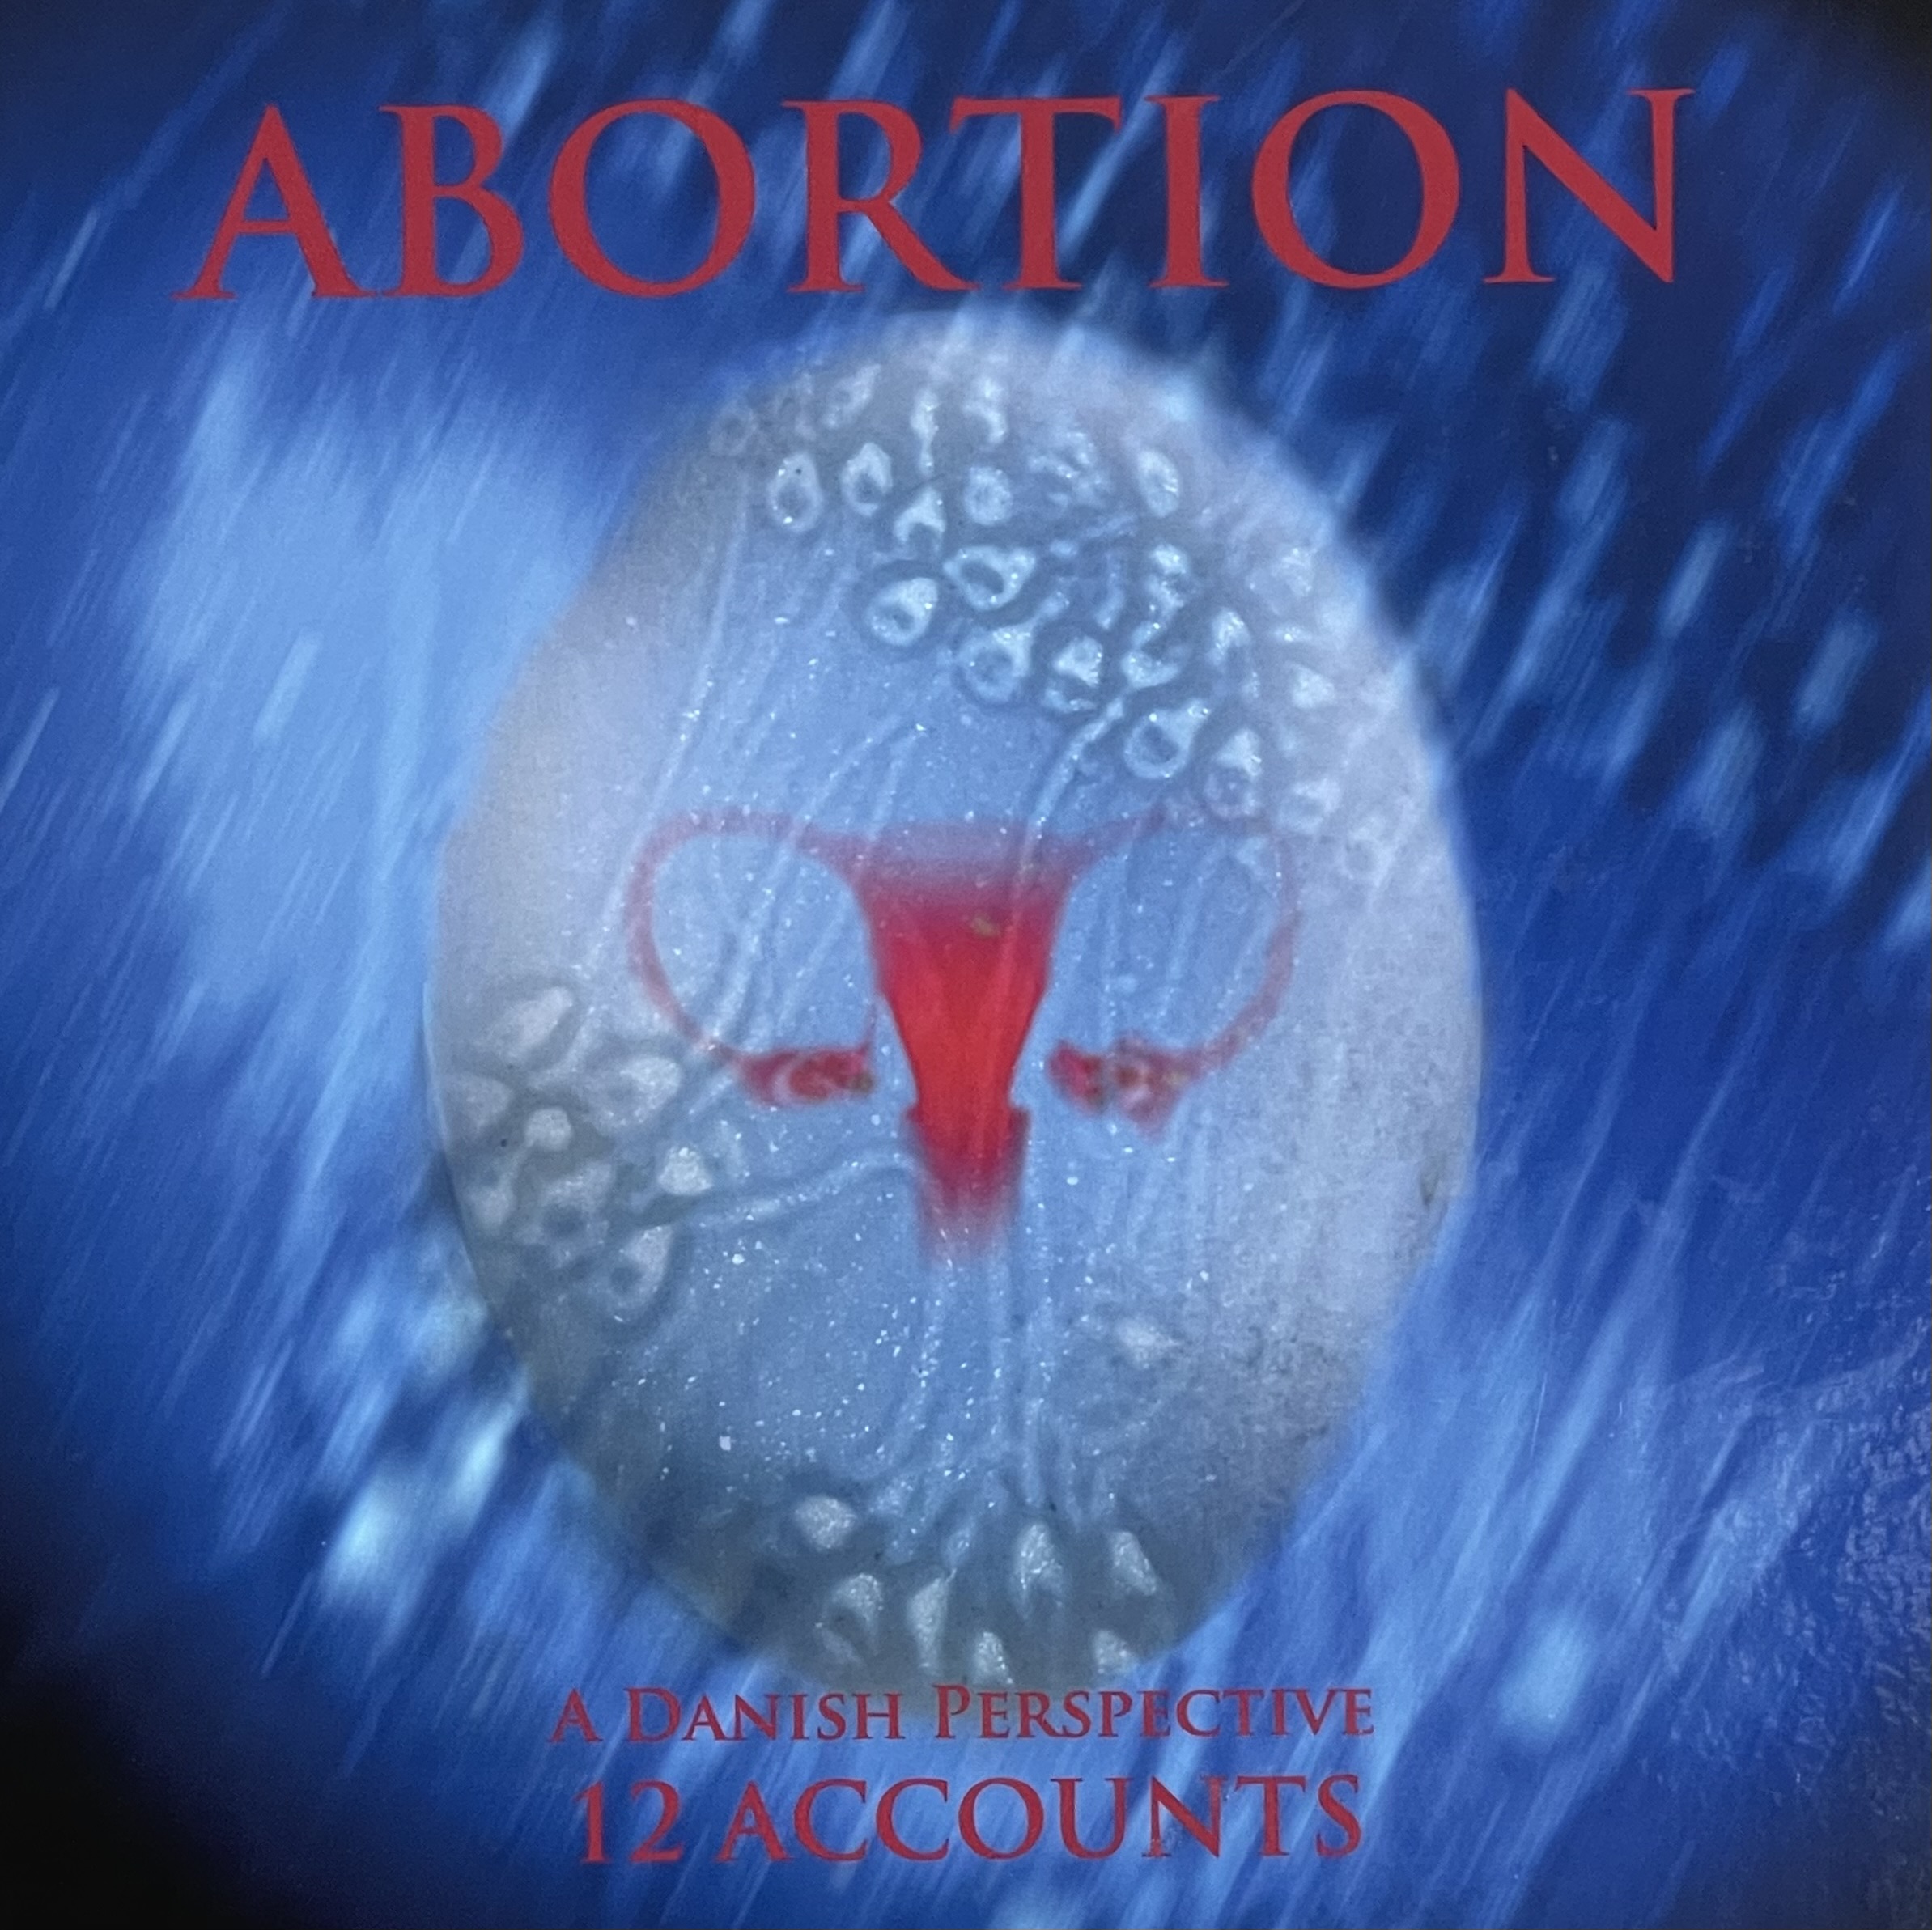 Abortion. A Danish perspective. 12 Accounts